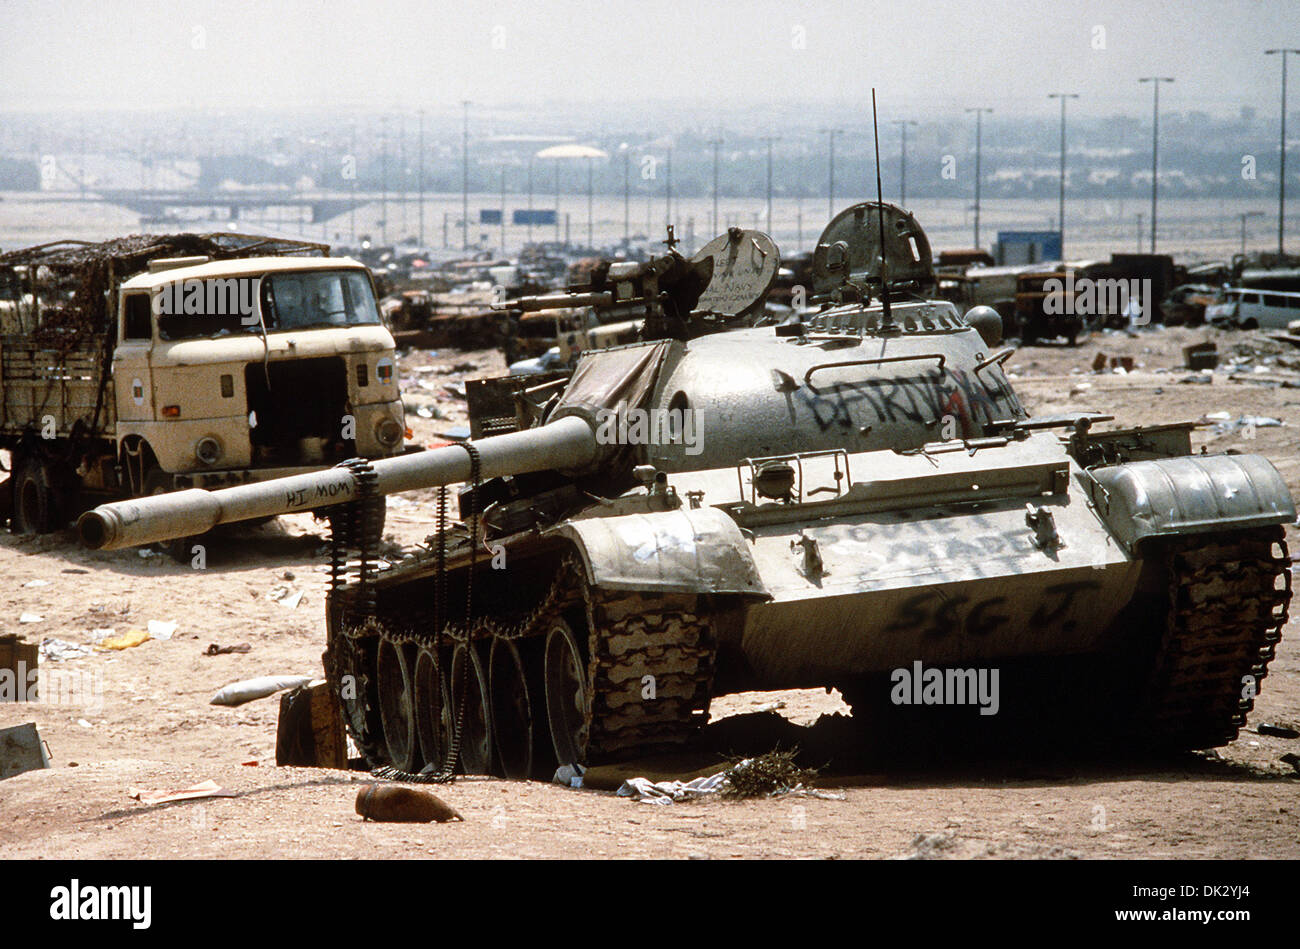 A destroyed Iraqi T-55 main battle tank, painted with graffiti by Coalition troops, lies amidst other destroyed vehicles along Kuwait Highway 8, the route fleeing Iraqi forces took as they retreated from Kuwait during Operation Desert Storm April 18, 1991 in Kuwait. The road is known as the 'highway of death' because of the number of vehicles destroyed by allied forces. Stock Photo